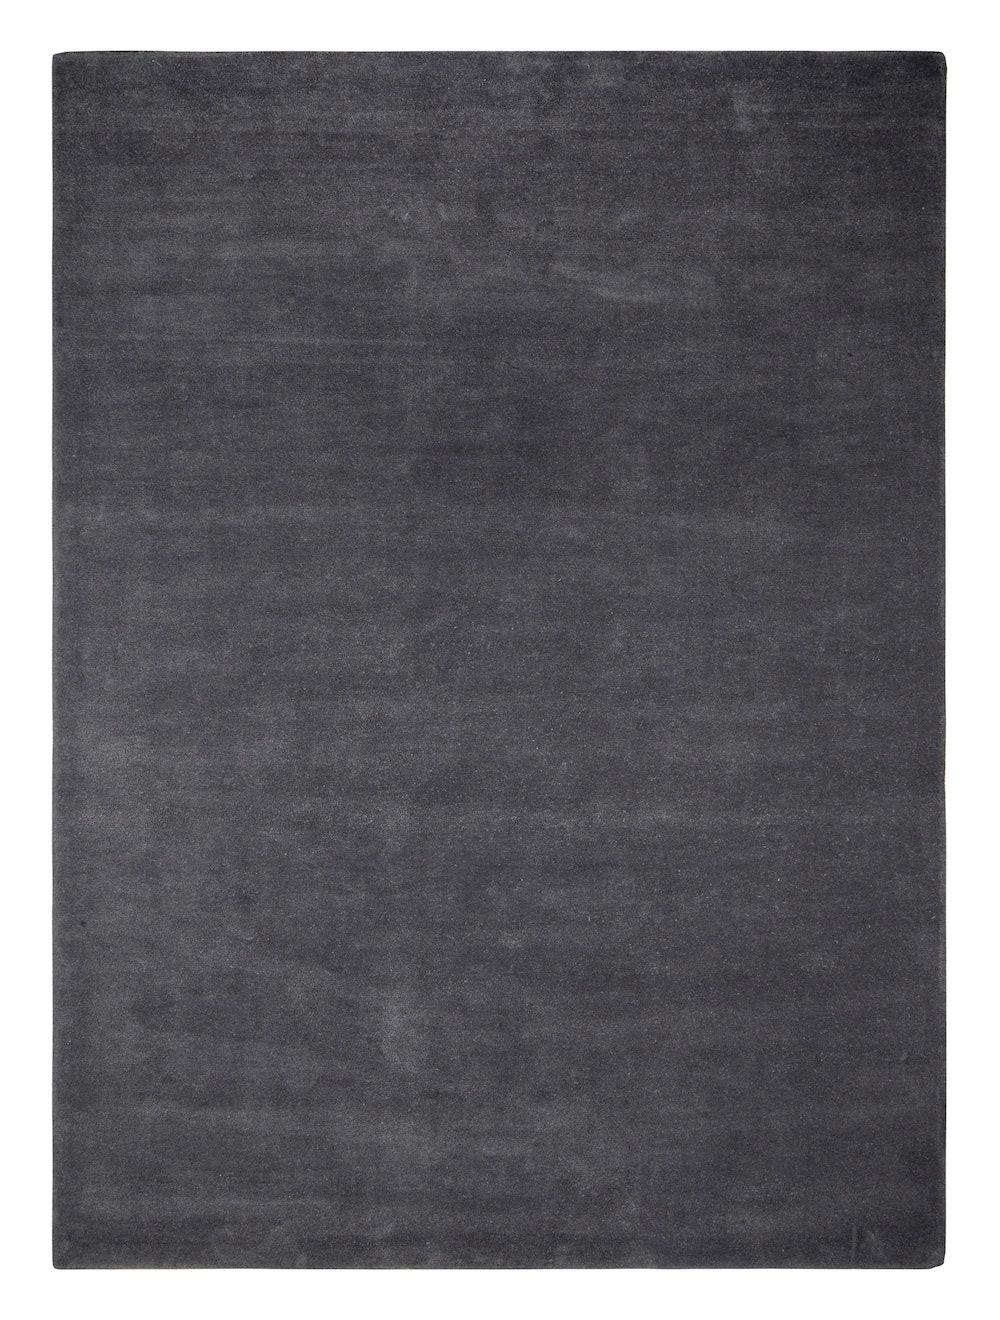 Graphite RePeat Carpet by Massimo Copenhagen.
Handtufted.
Materials: 100% Recycled PET, Cotton.
Dimensions: W 250 x H 350 cm.
Available colours: Graphite, Cream, Beige, Pistachio, and Pastel Yellow. 
Other dimensions are available: 160x230 cm,